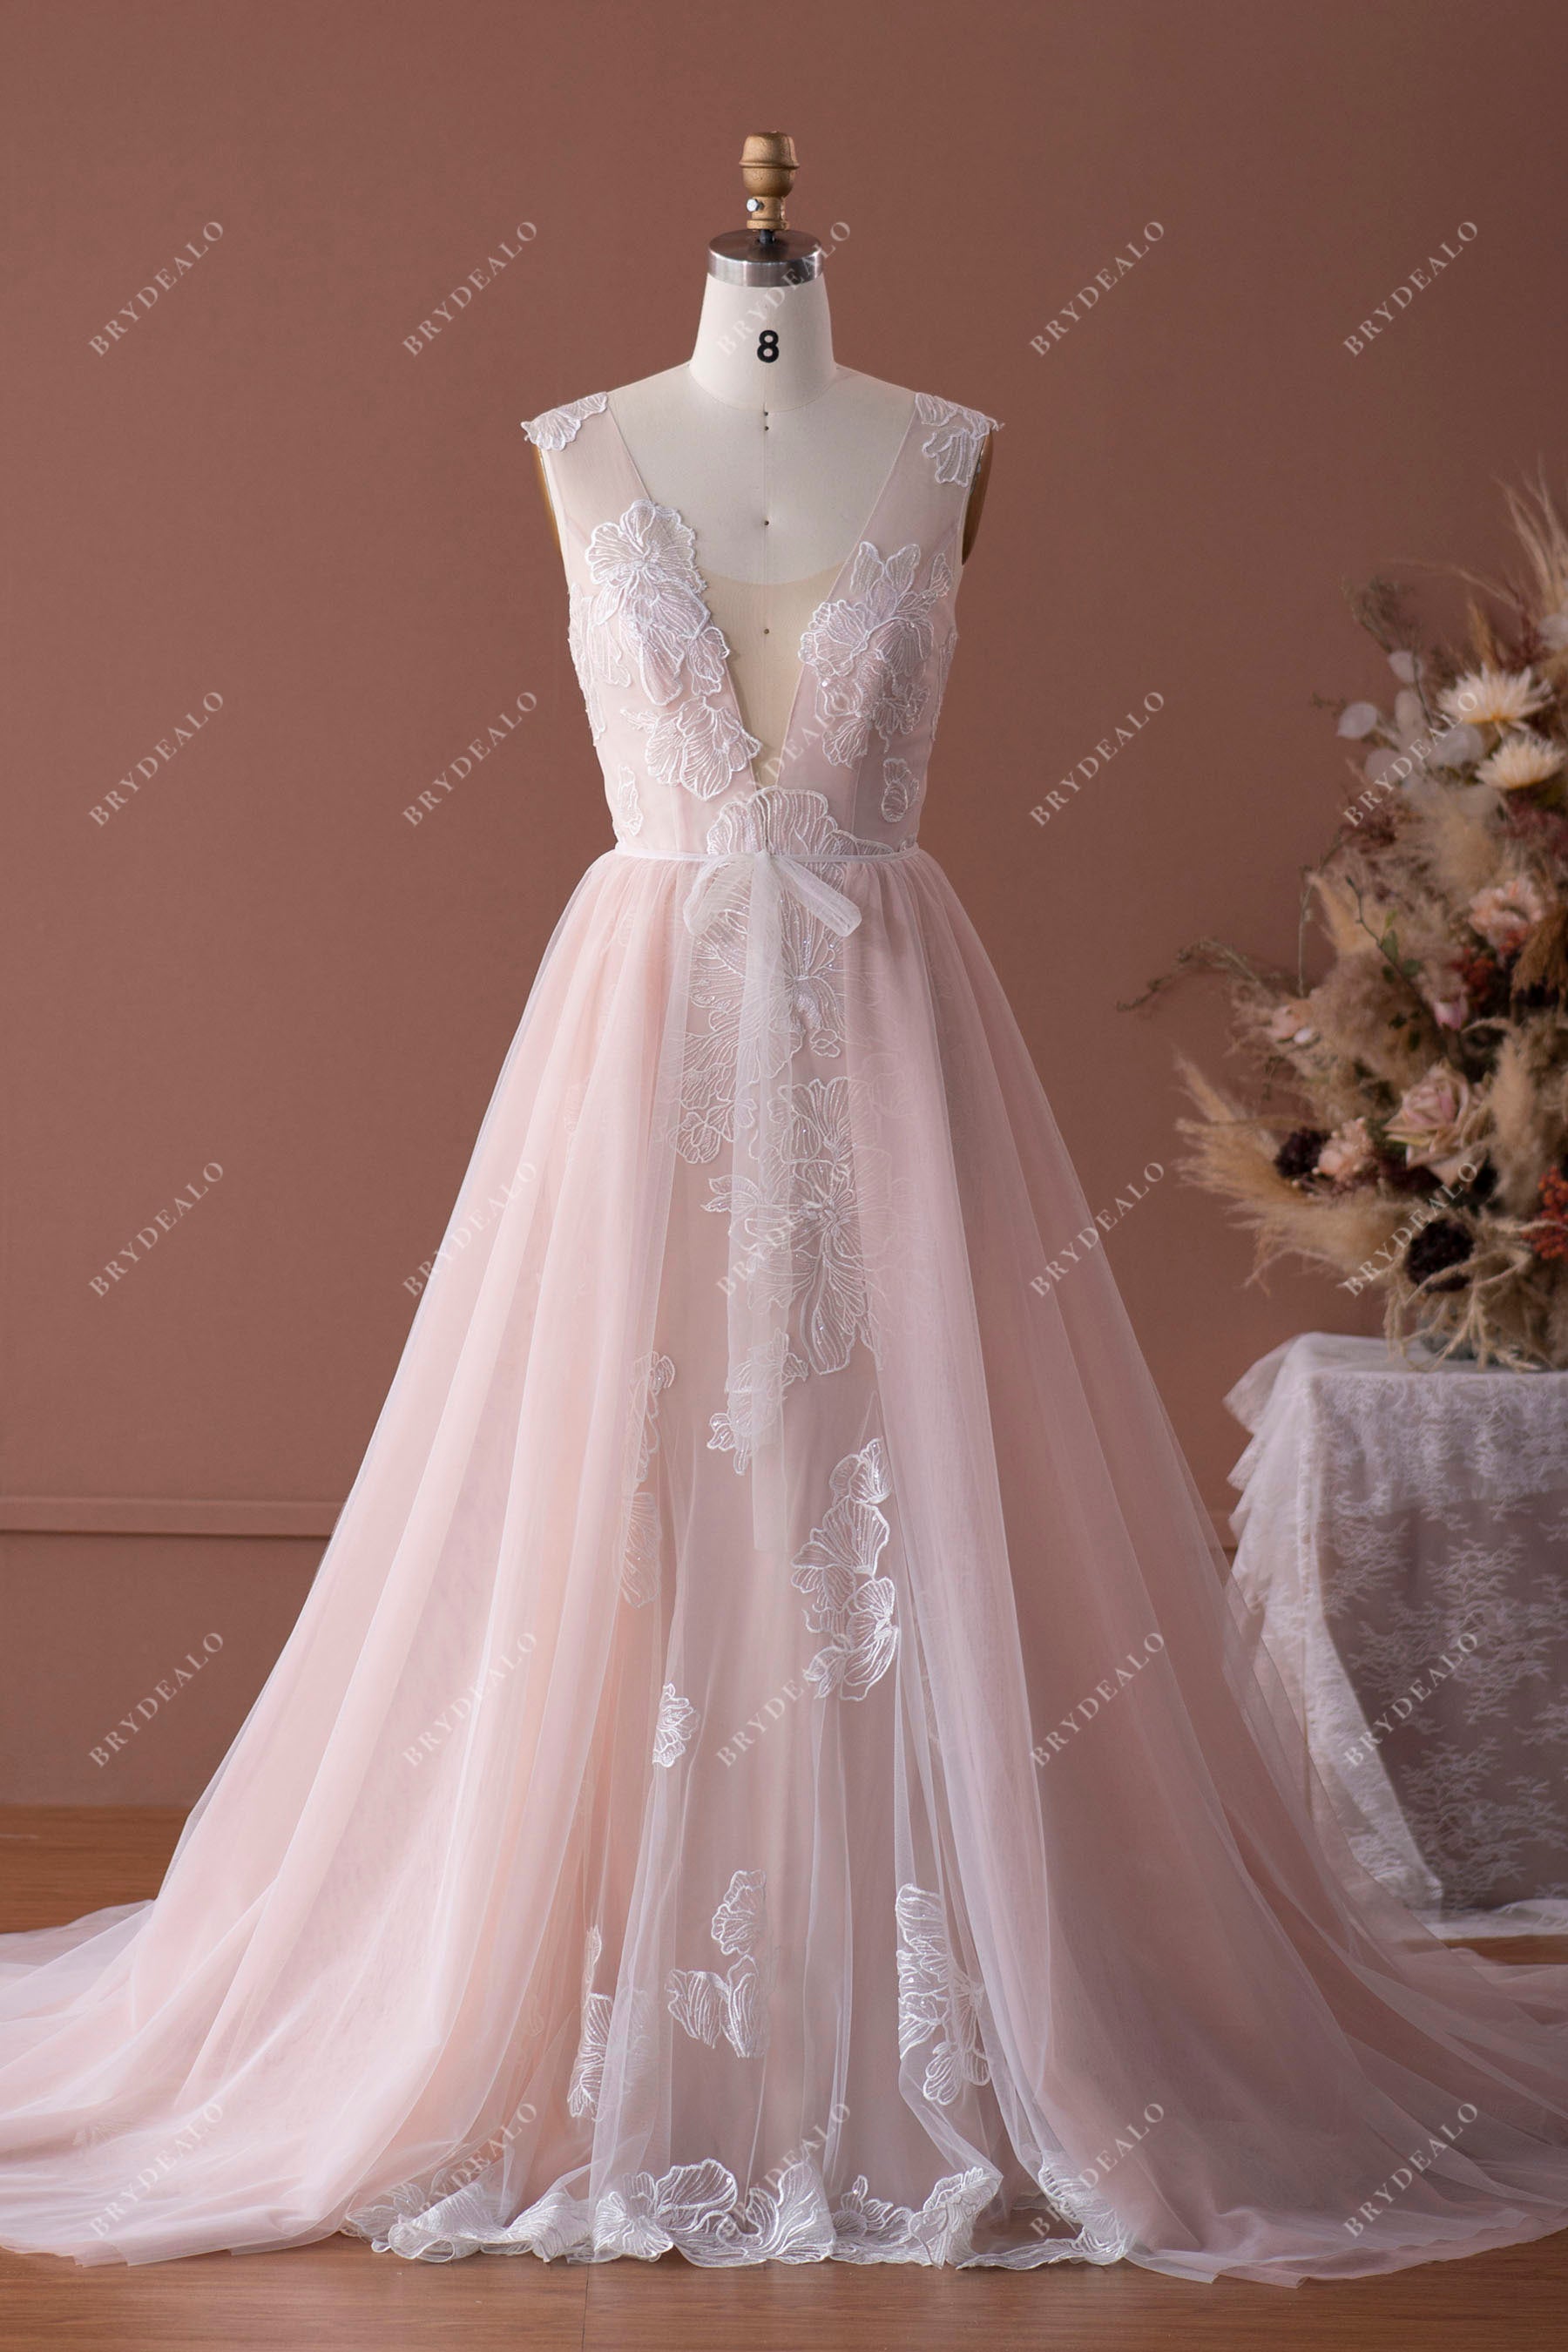 Dusty Rose Bridal Gown with Detachable Overskirt